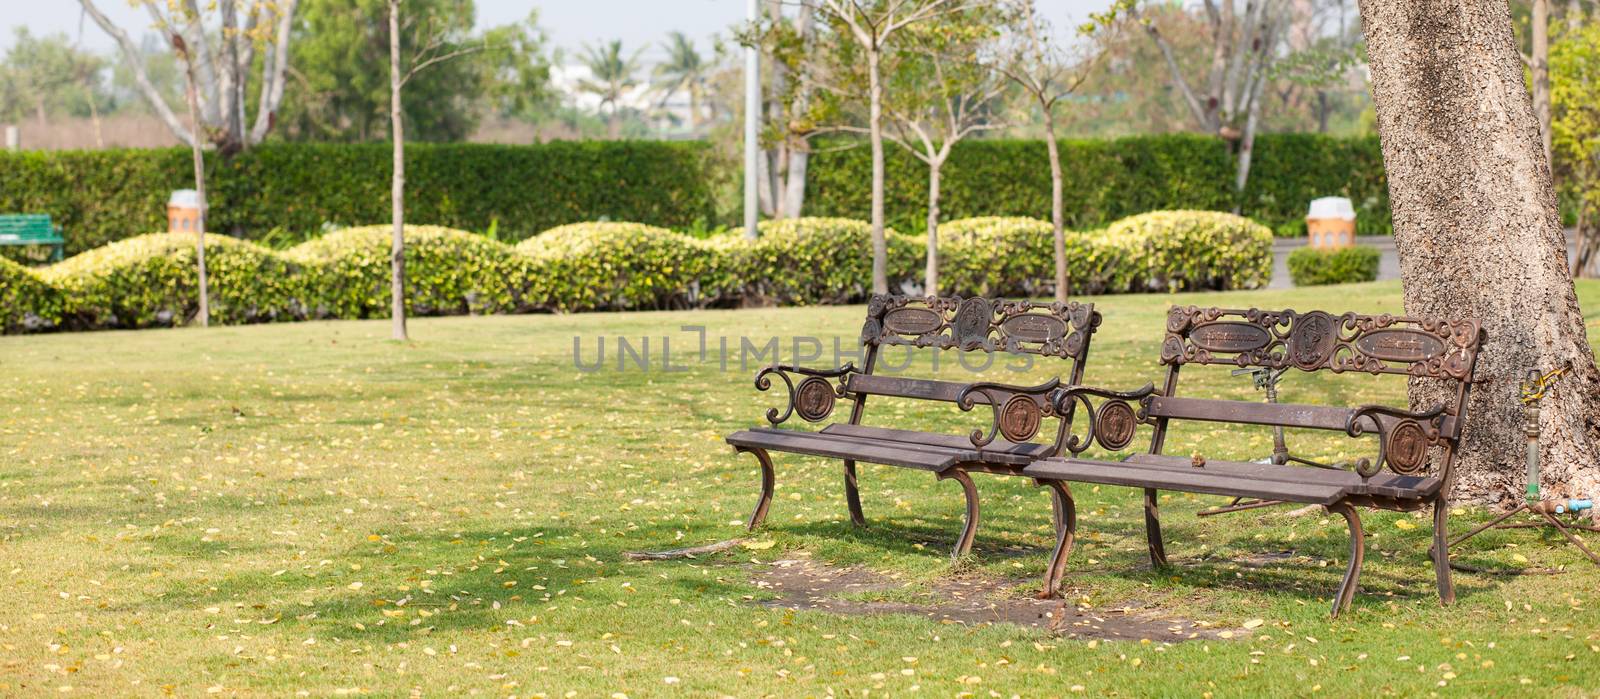 Benches on the lawn Under the big tree in the park.